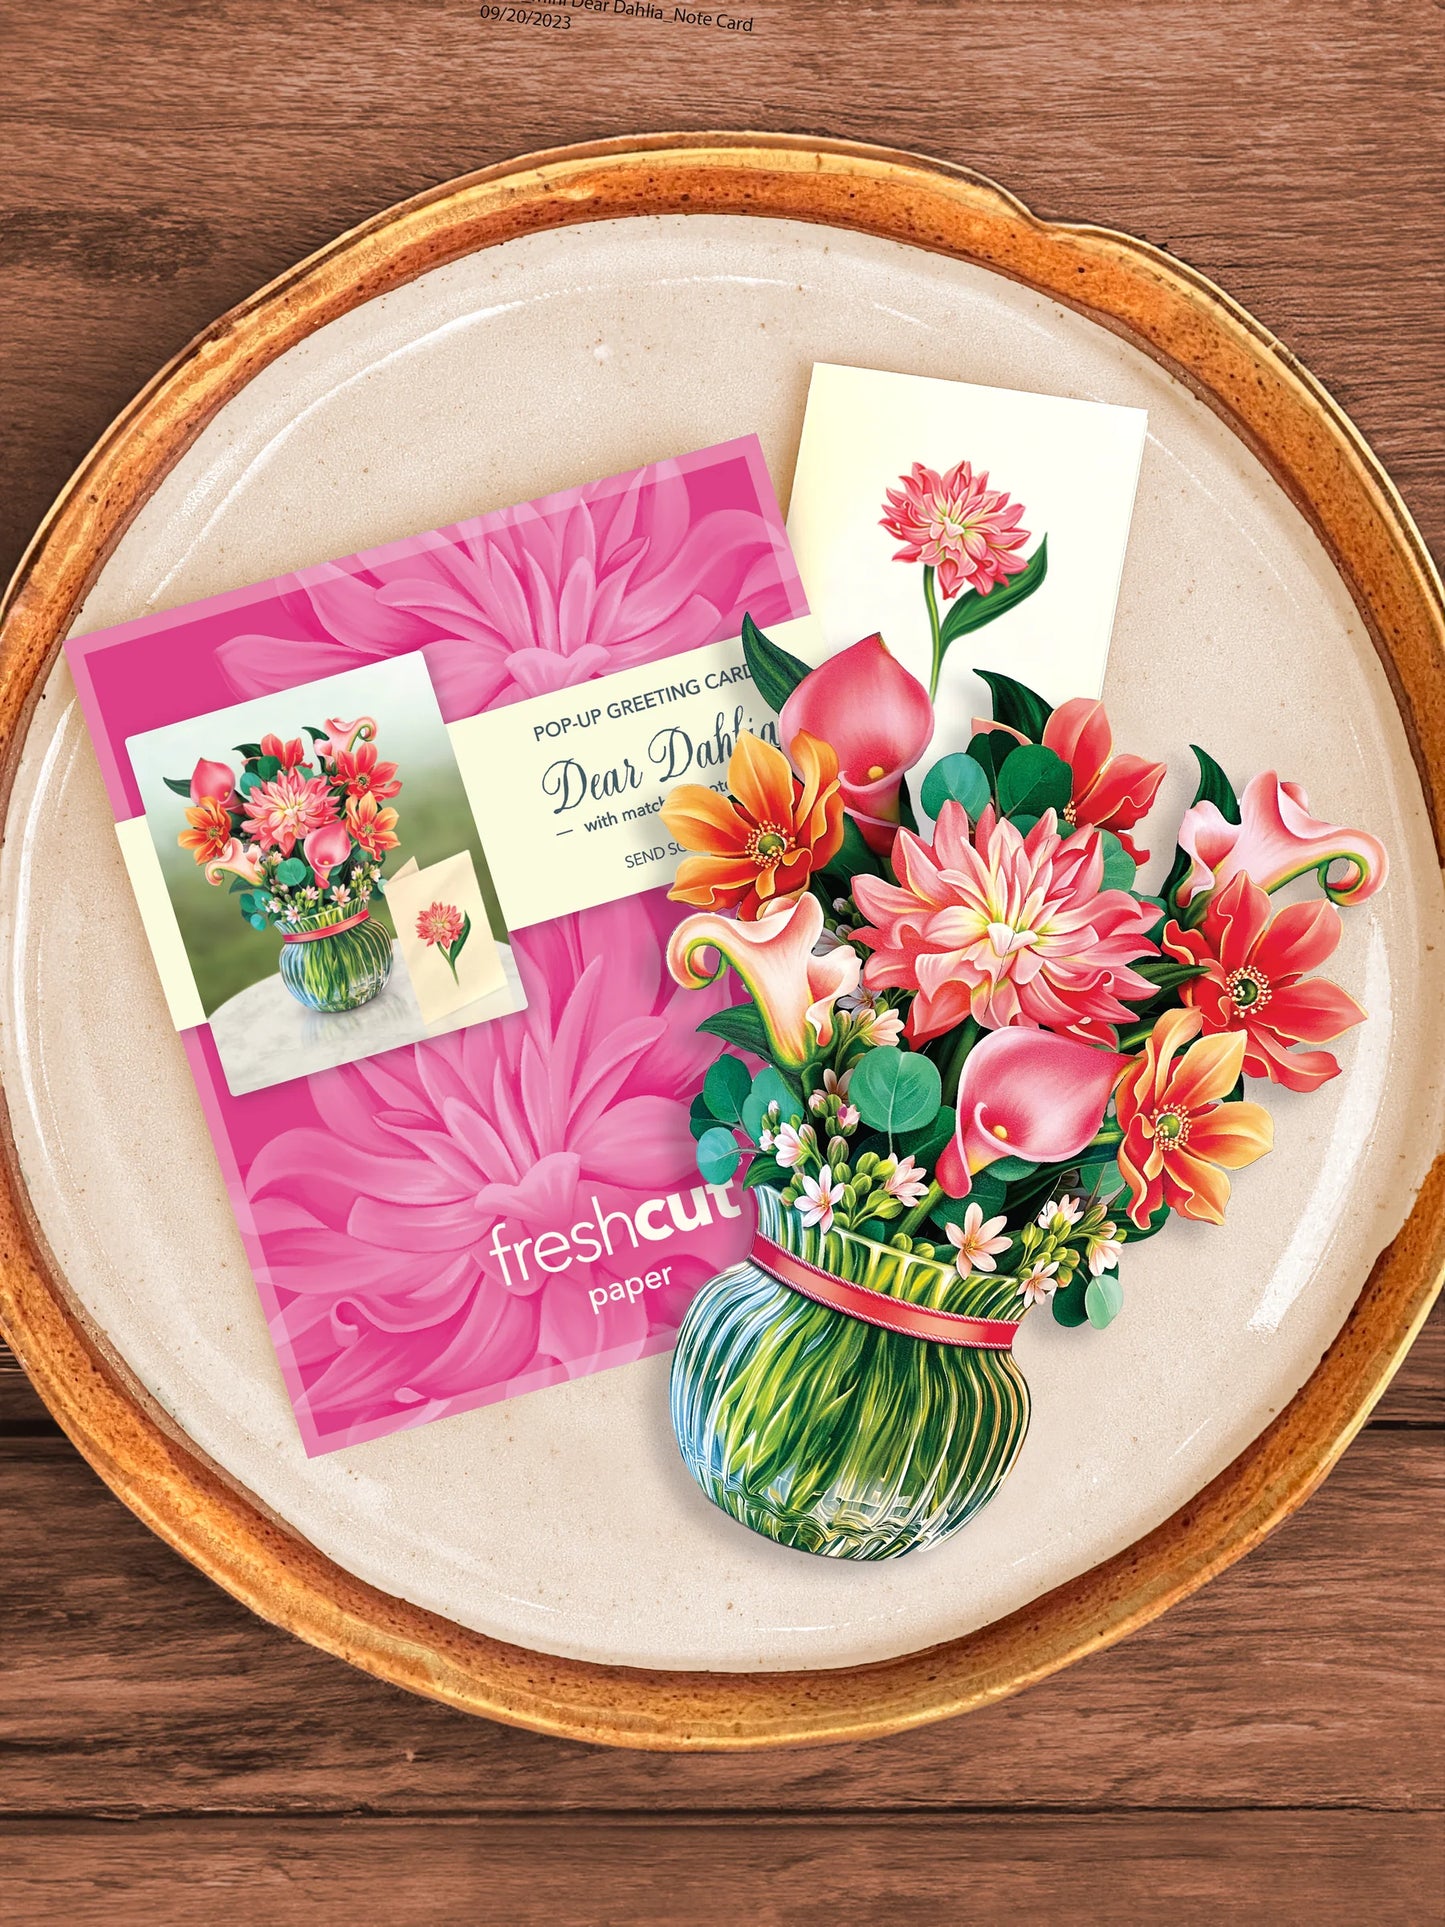 Dear Dahlia bouquet, enclosure card, and mailing envelope arranged on a tray.